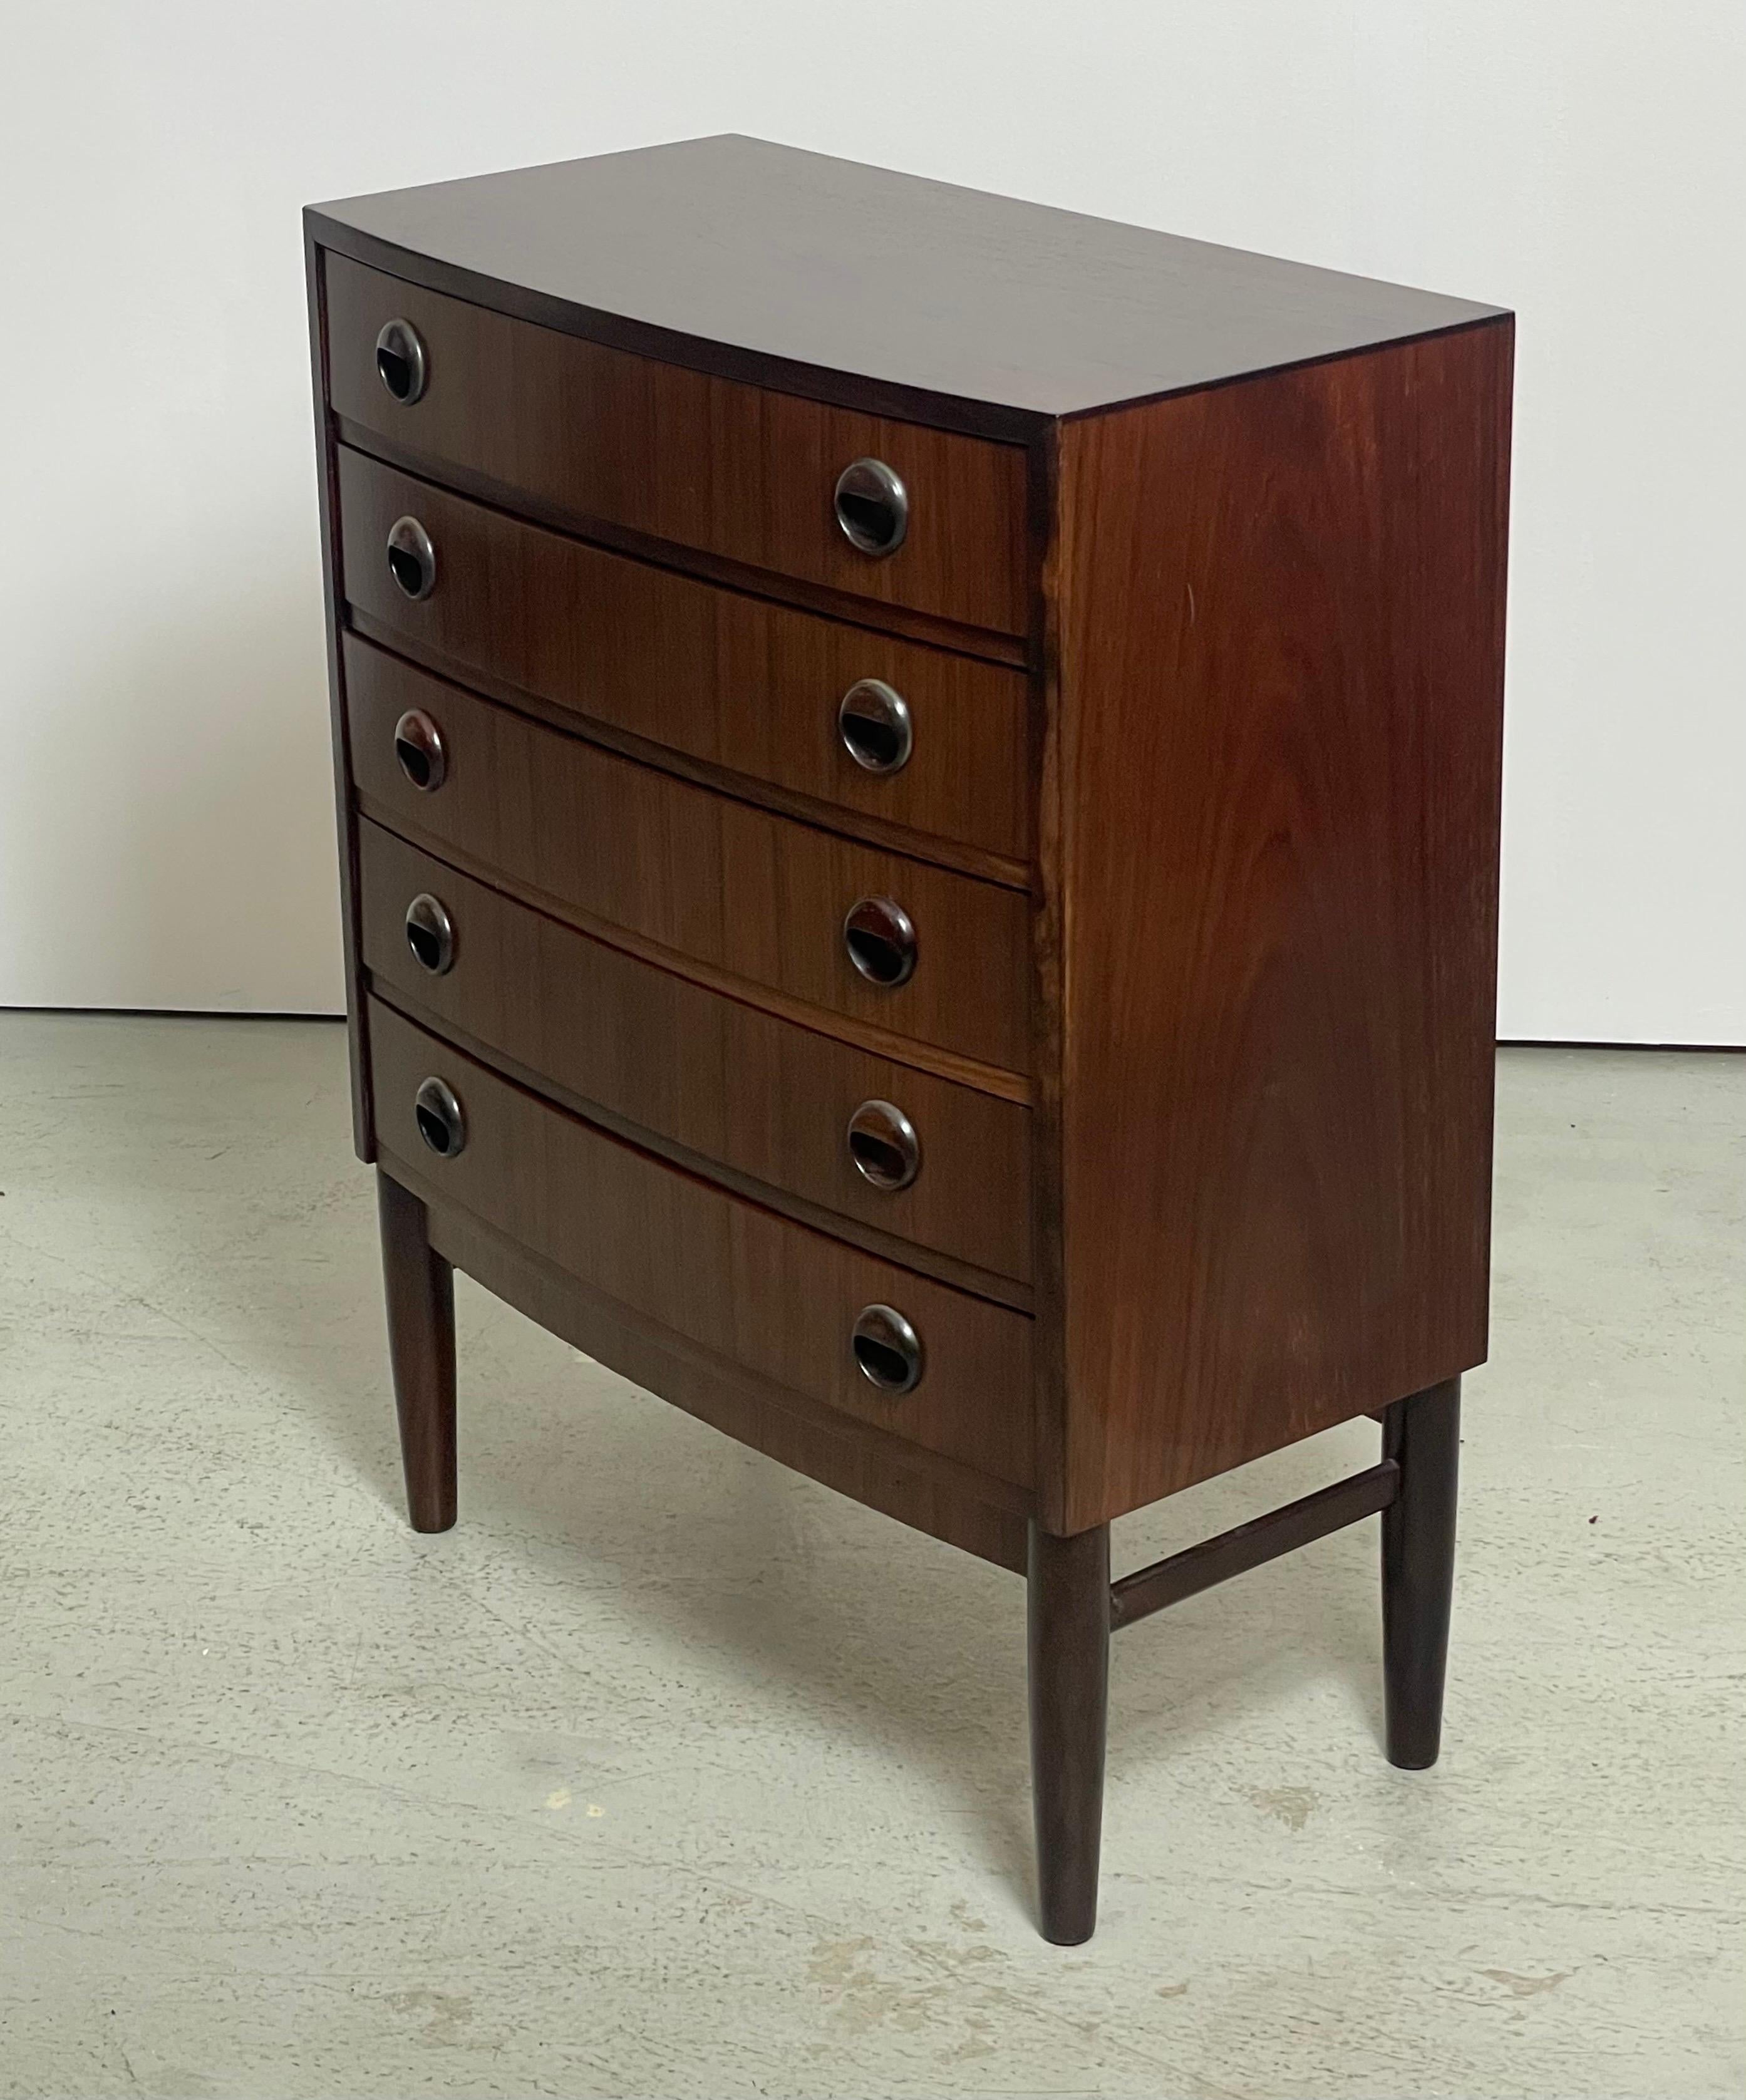 Danish Chest of Drawers in Palisander by Kai Kristiansen 1960s For Sale 4